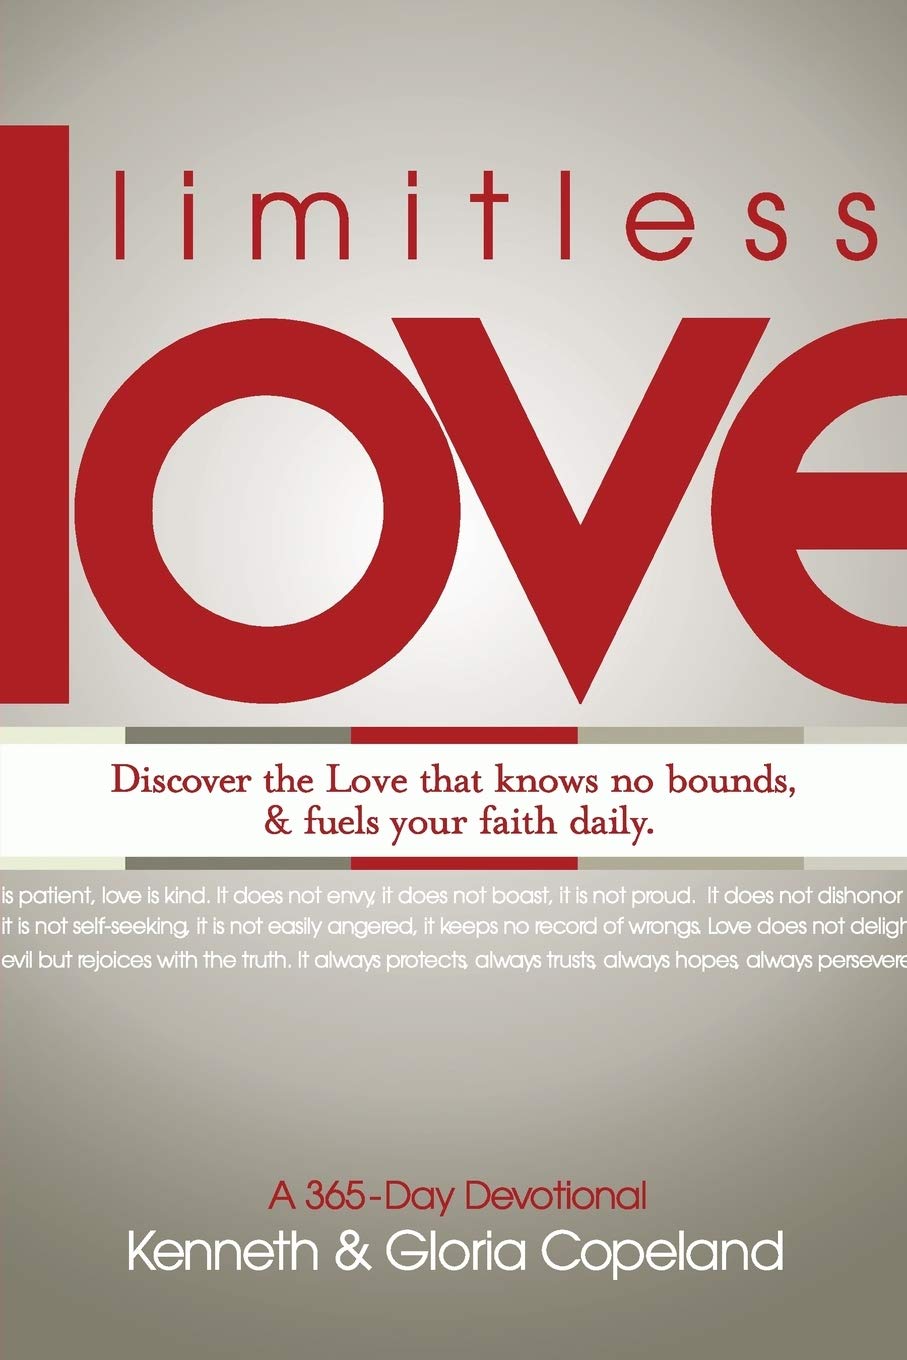 Limitless Love, A 365-Day Devotional